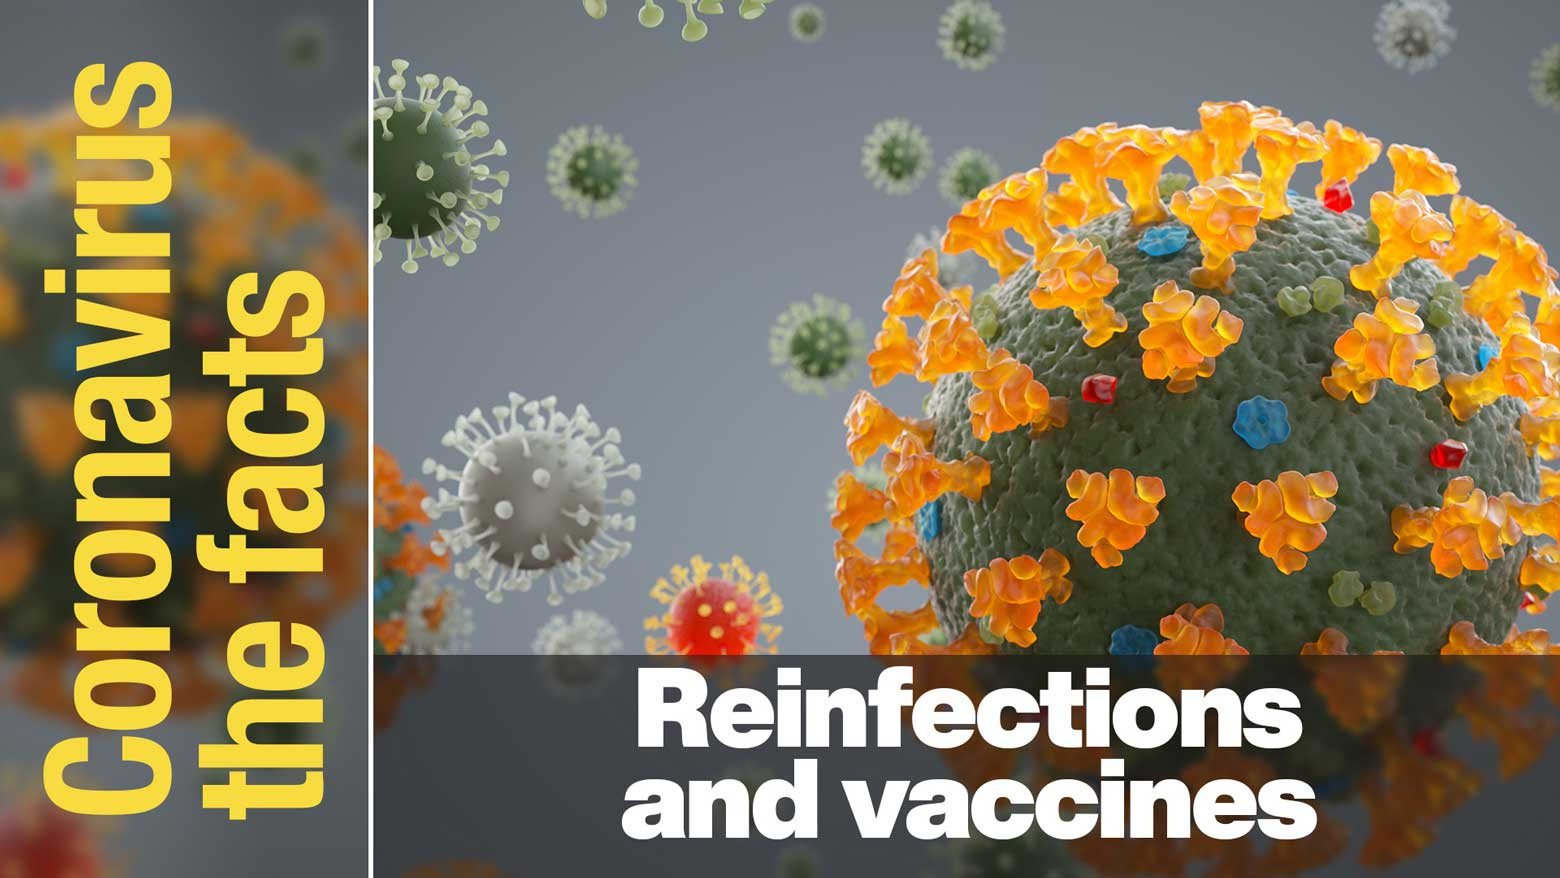 The relationship between reinfection and the effectiveness of vaccines